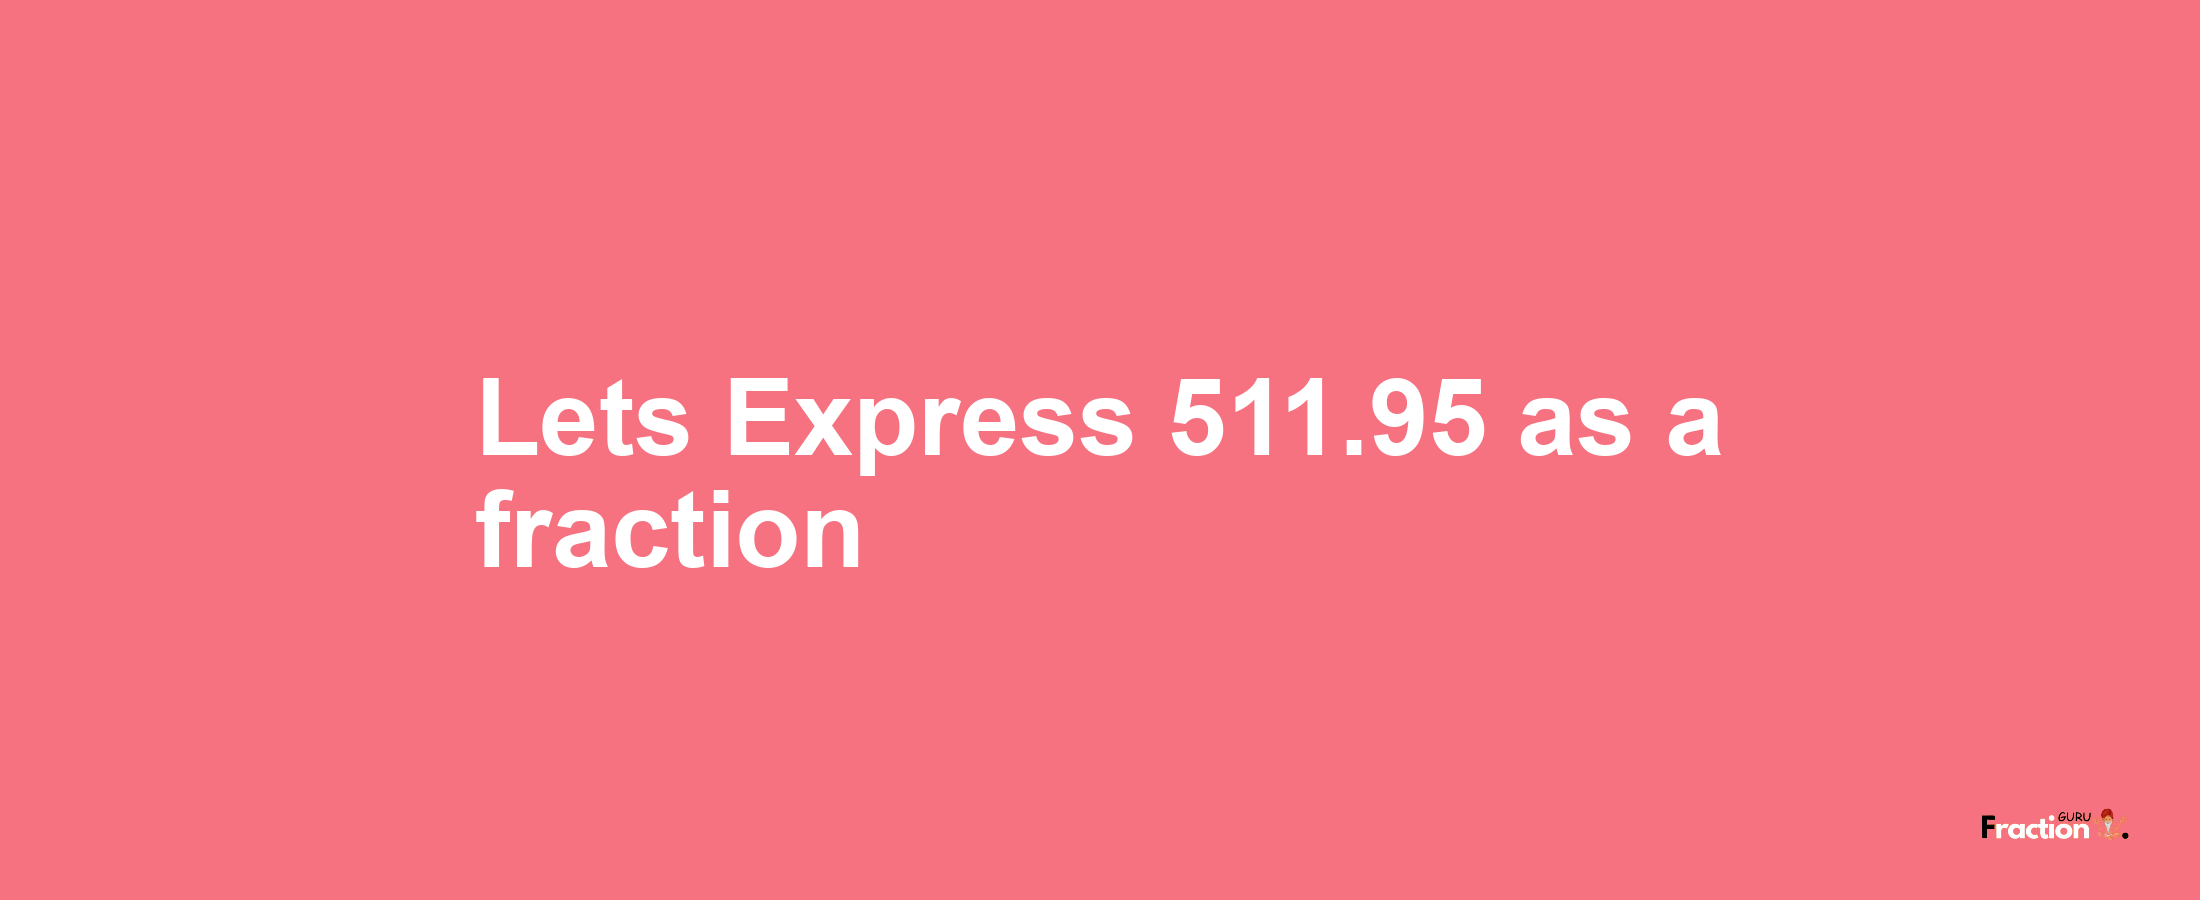 Lets Express 511.95 as afraction